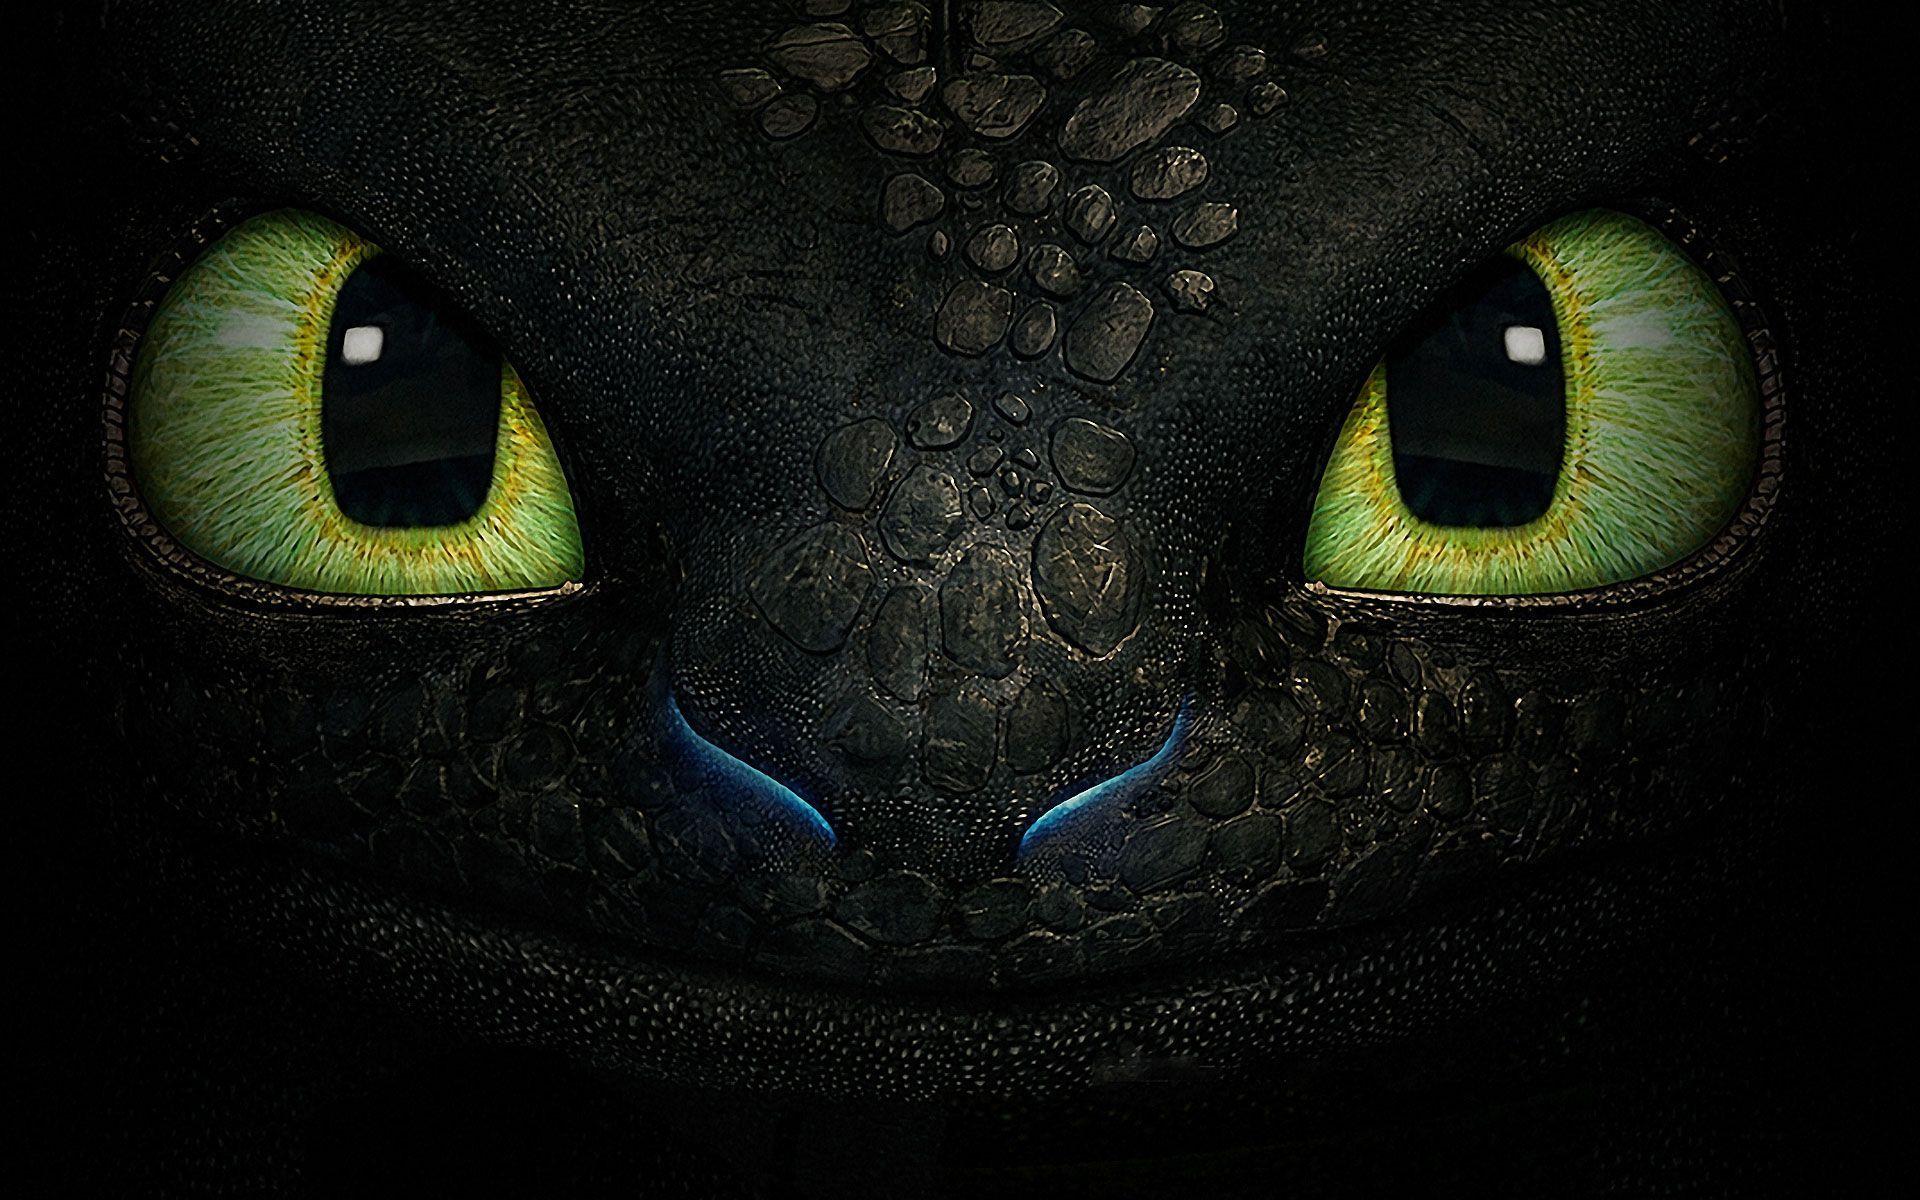 How to Train Your Dragon 2 Wallpaper HD Collection. HOW TO TRAIN